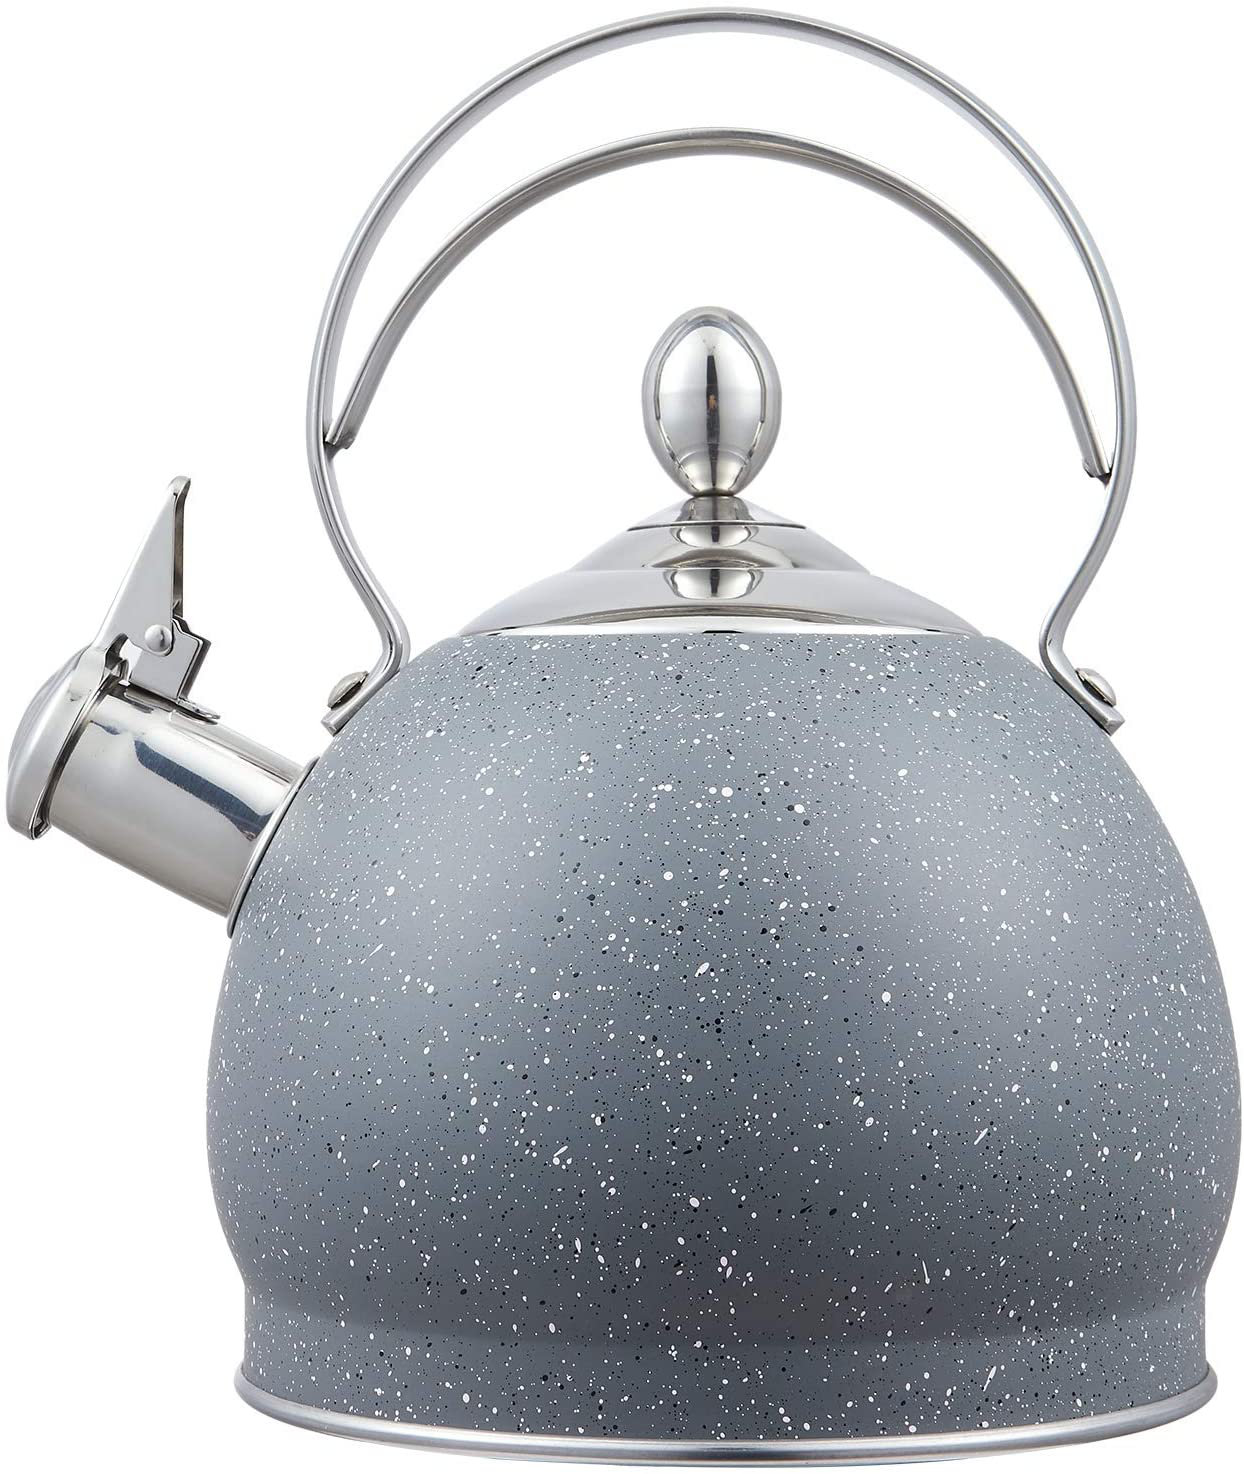 Lily's Home 2 Quart Stainless Steel Whistling Tea Kettle, the Perfect Stovetop  Tea and Water Boilers